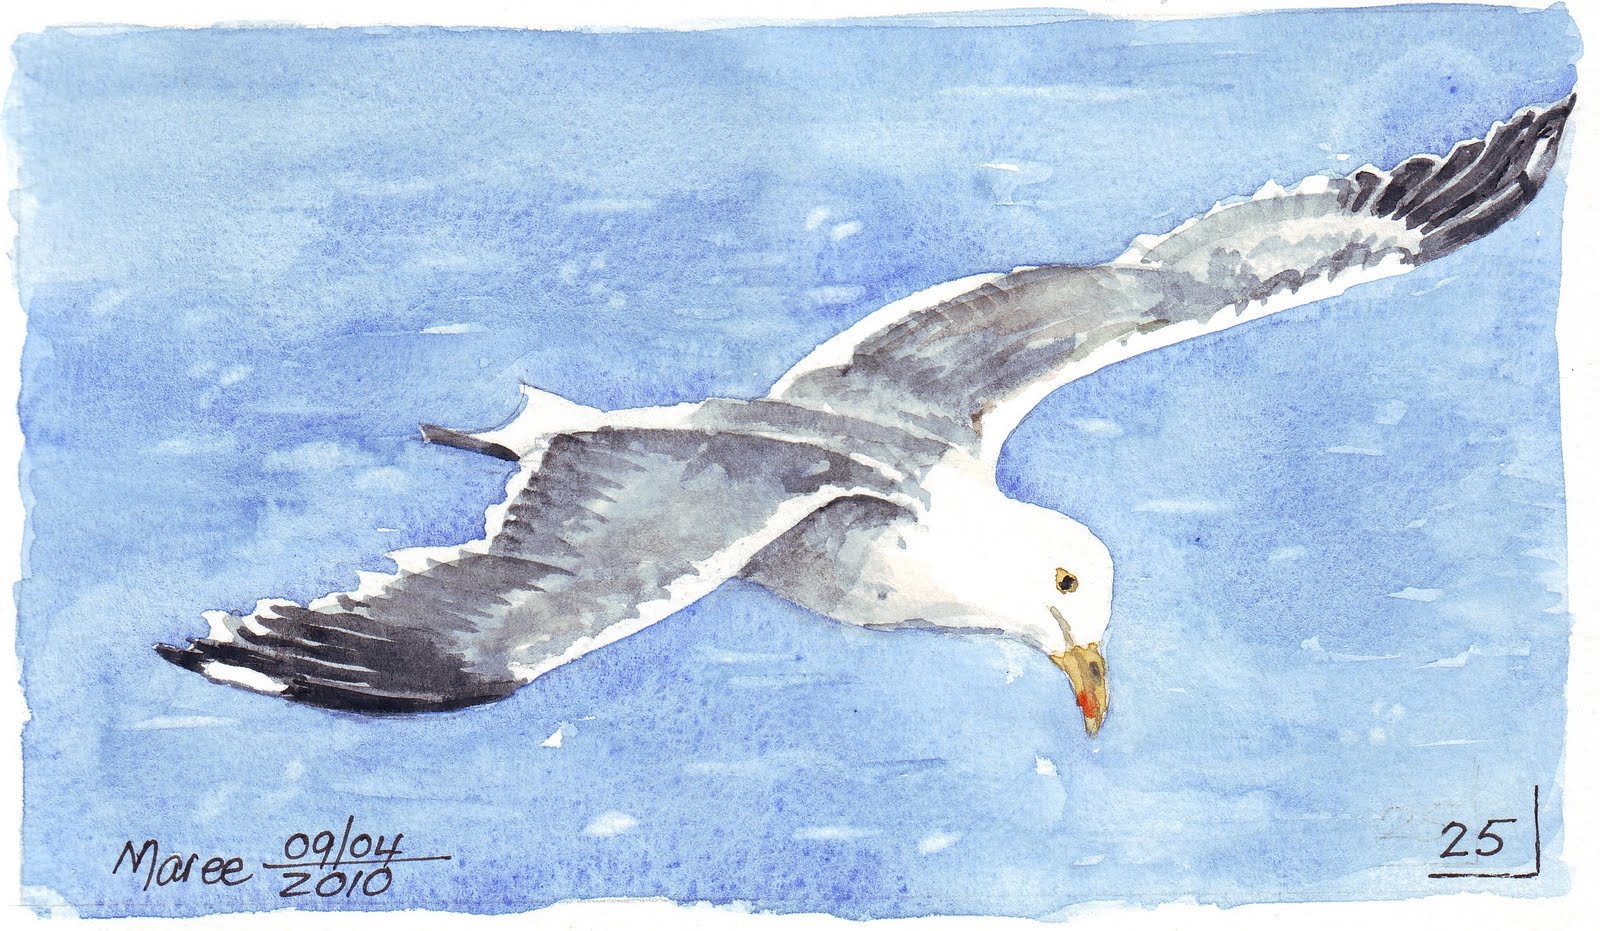 Seagull Painting